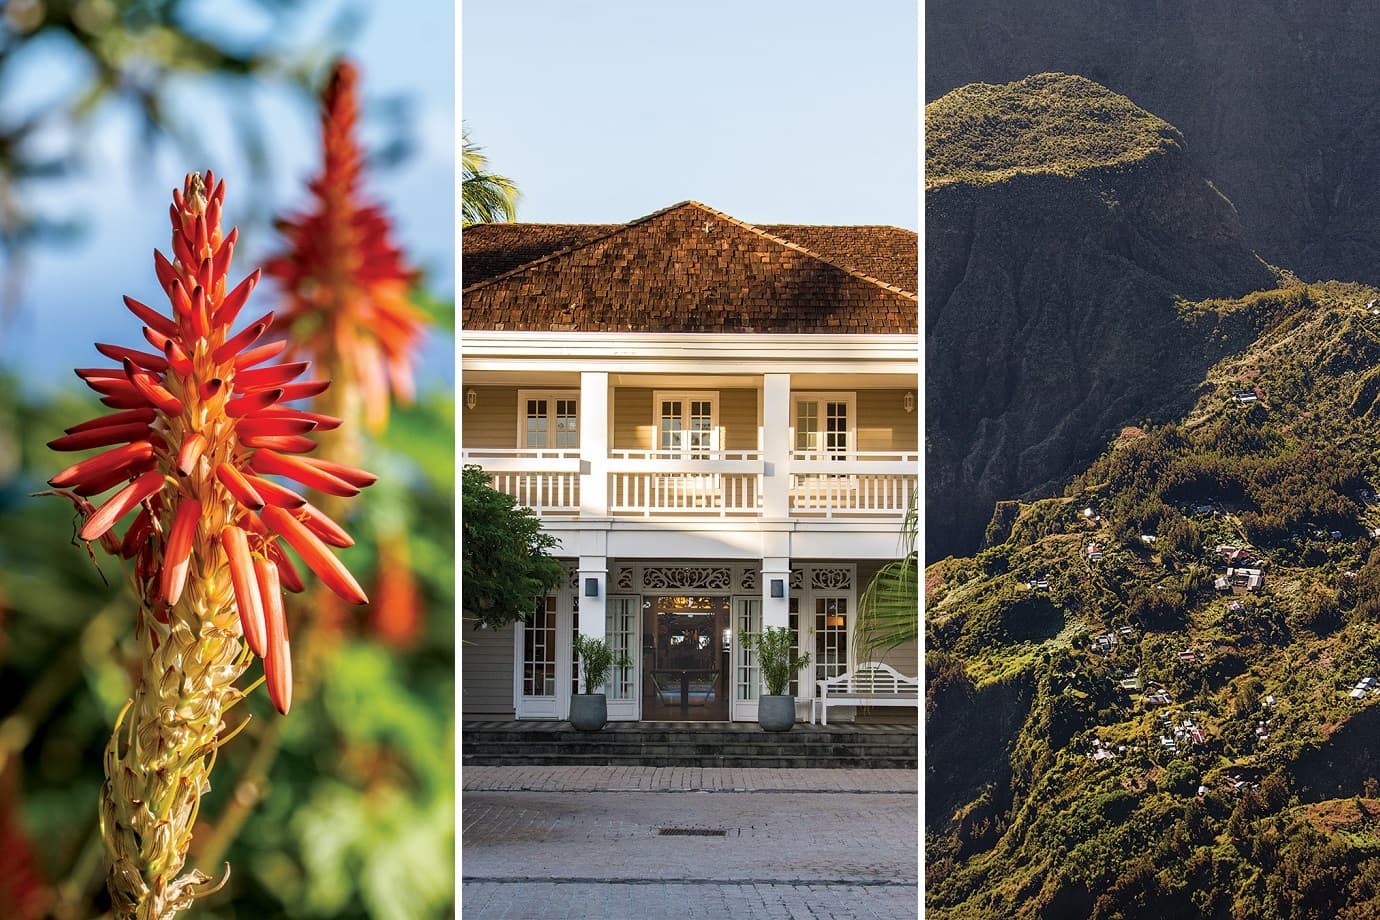 Scenes from the island of Réunion.